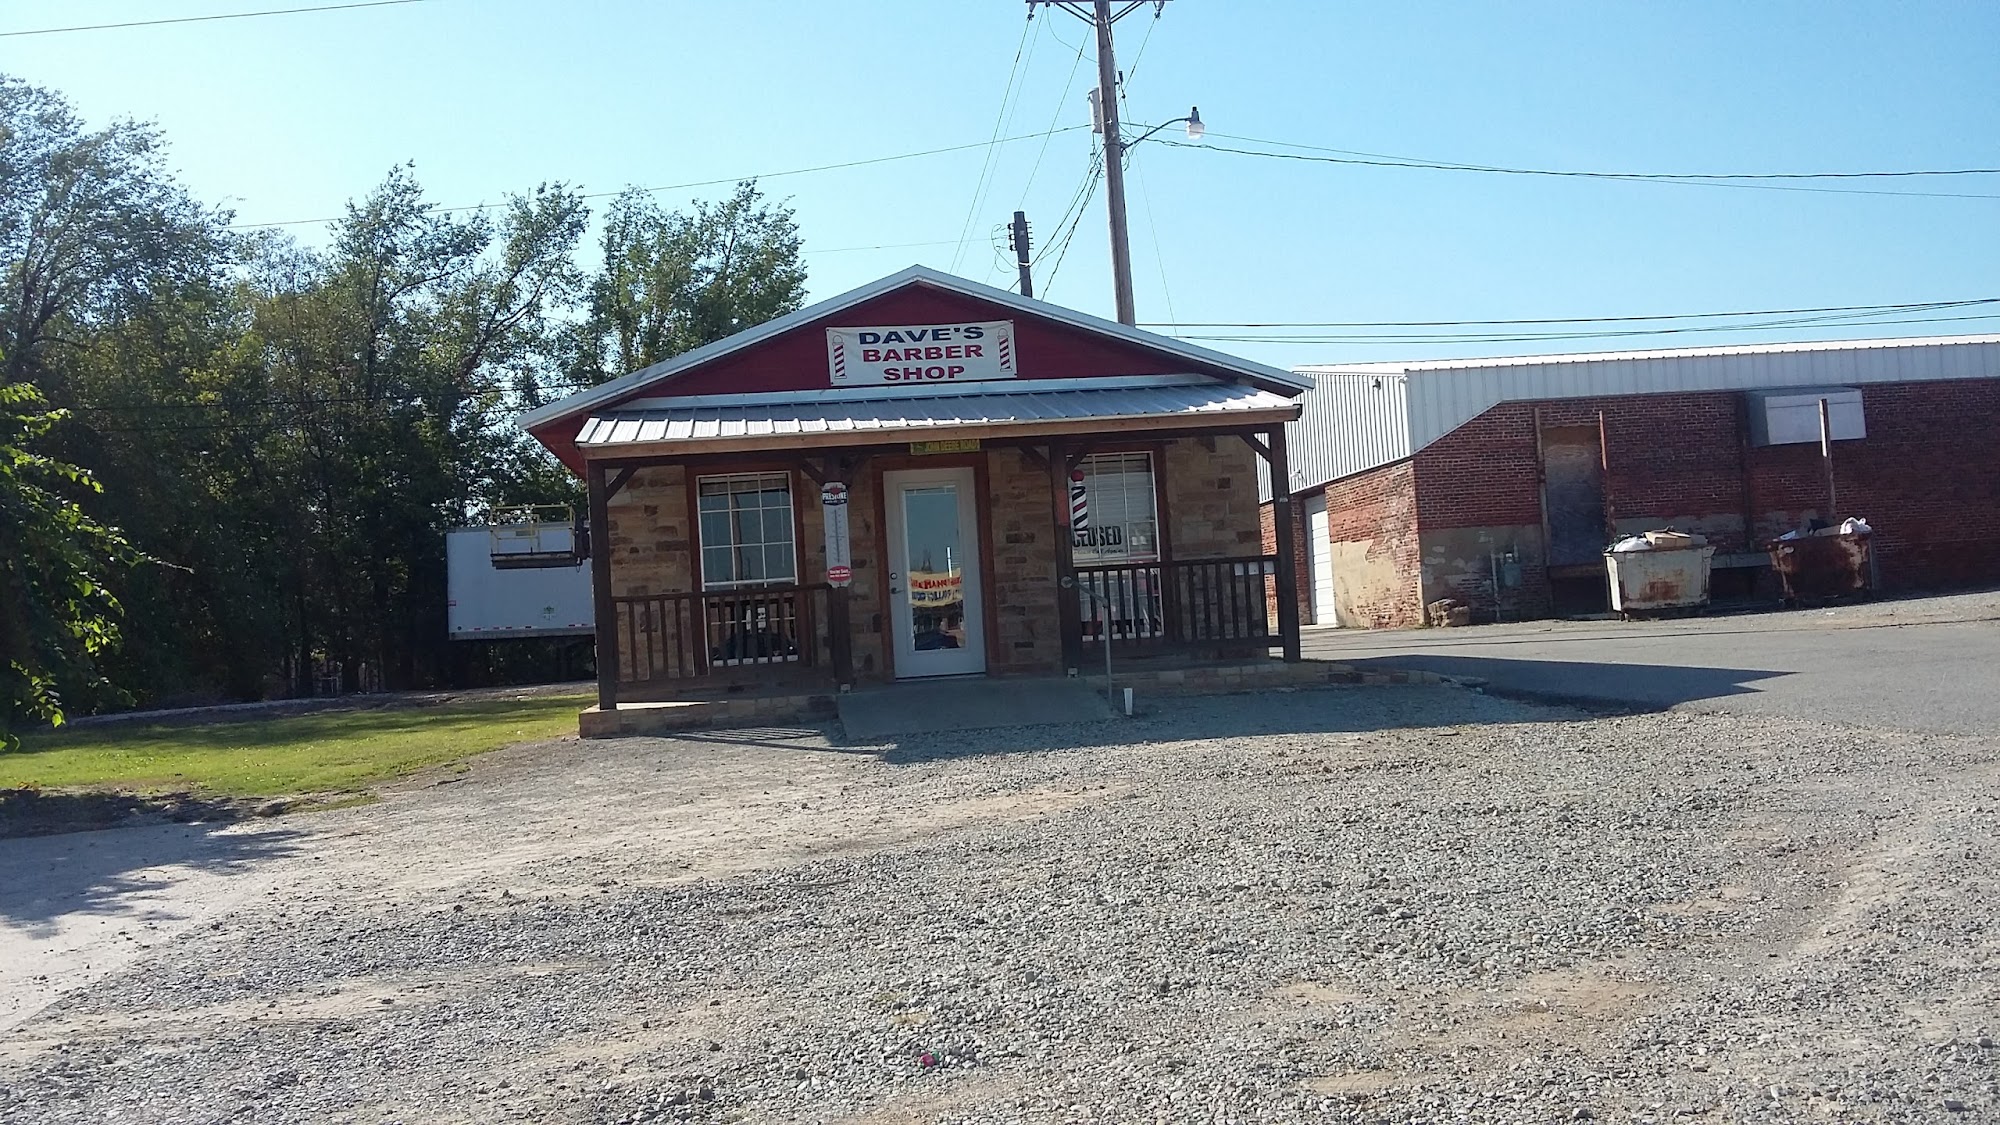 Dave's Barber Shop 113 S Woody Guthrie St, Okemah Oklahoma 74859